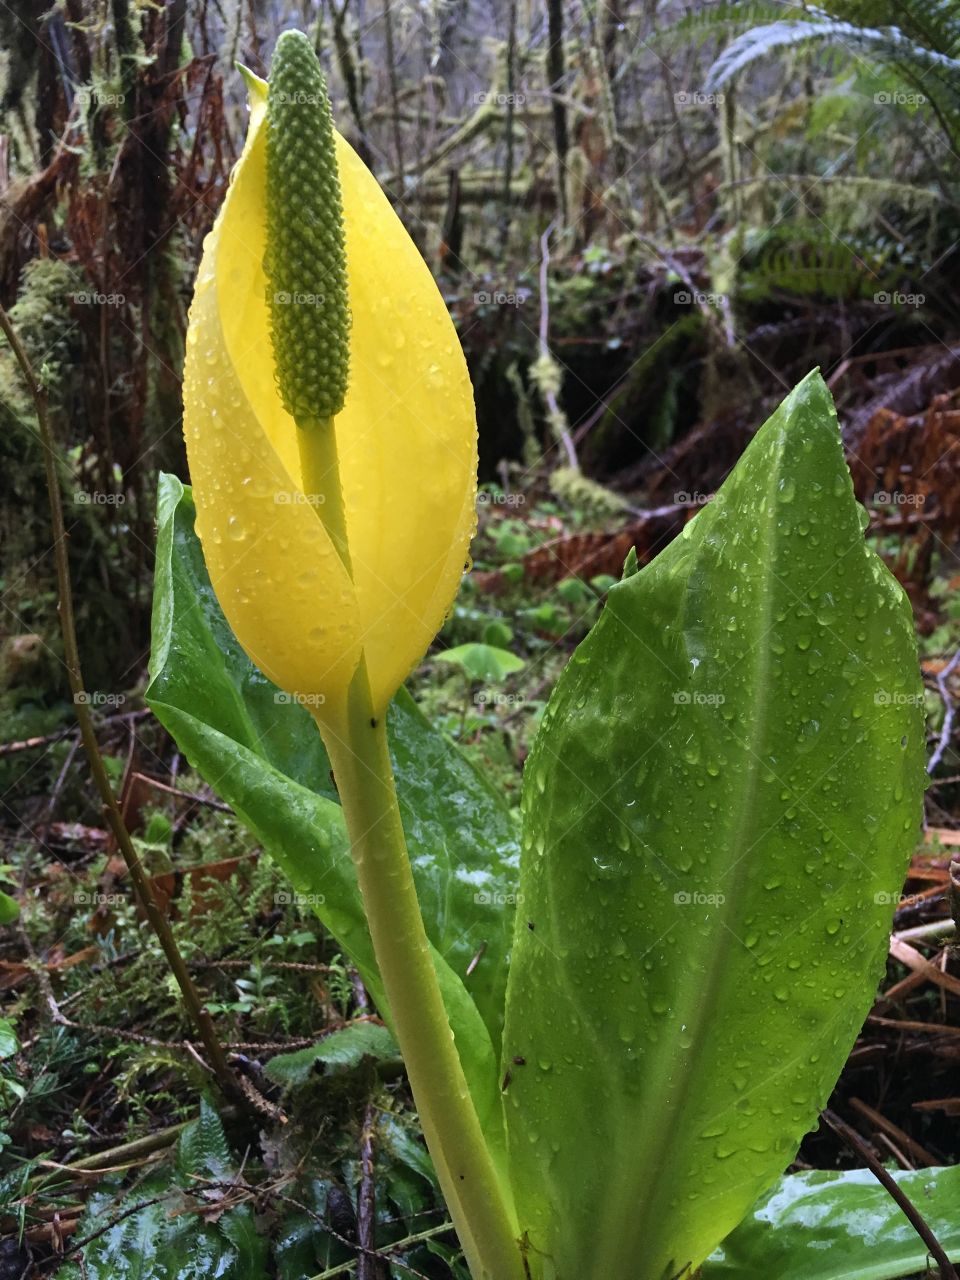 We call them skunk cabbage 